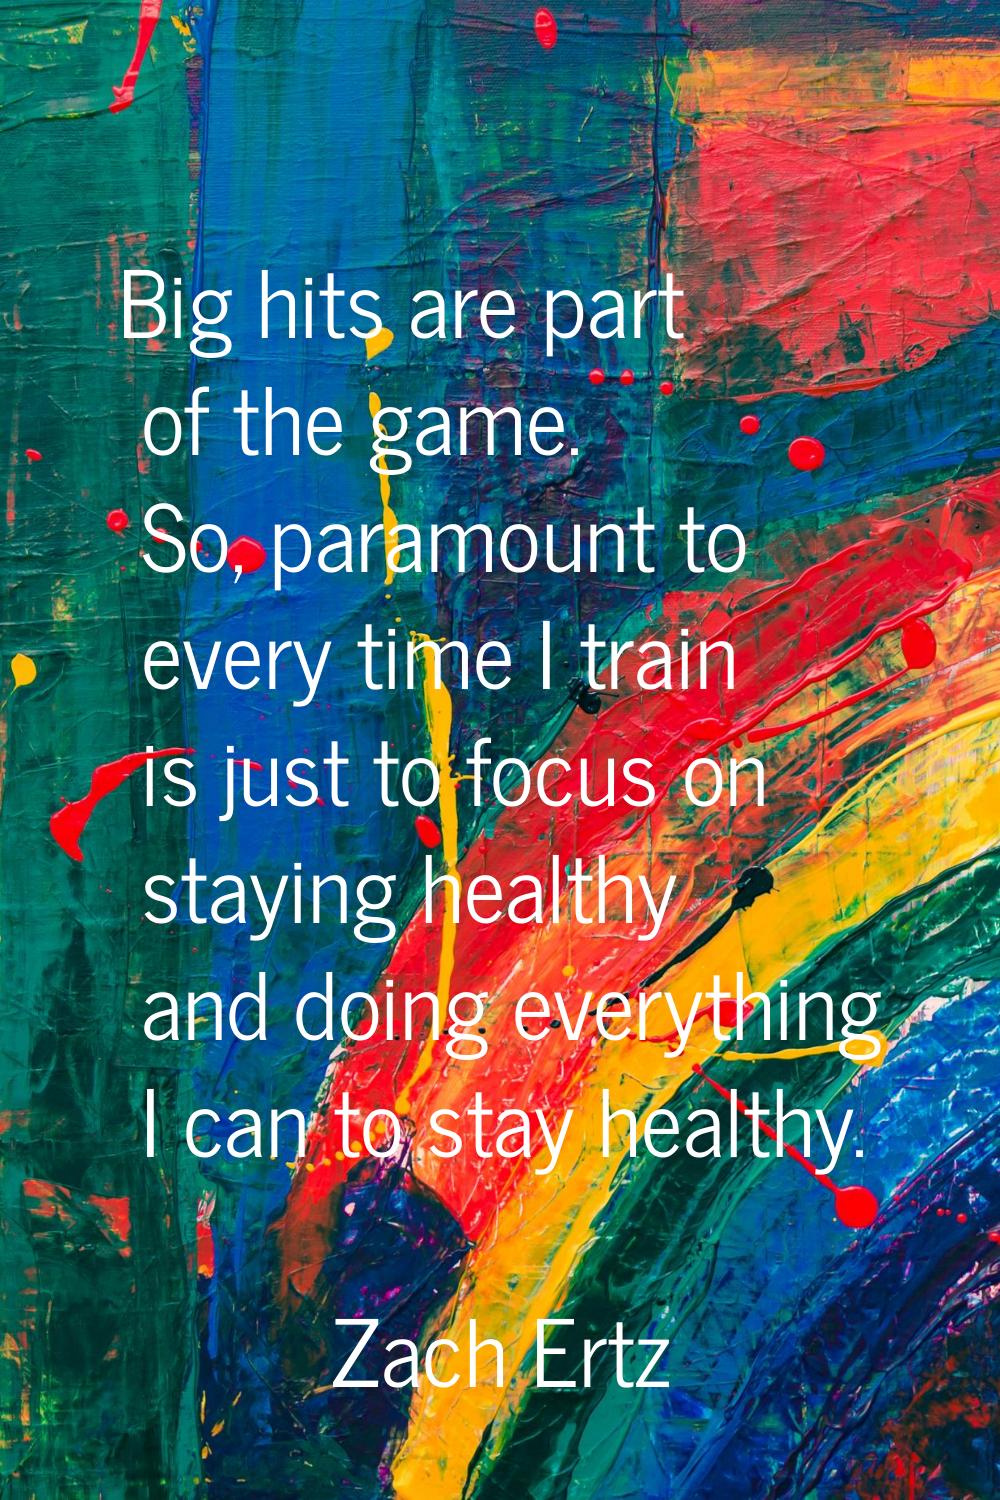 Big hits are part of the game. So, paramount to every time I train is just to focus on staying heal